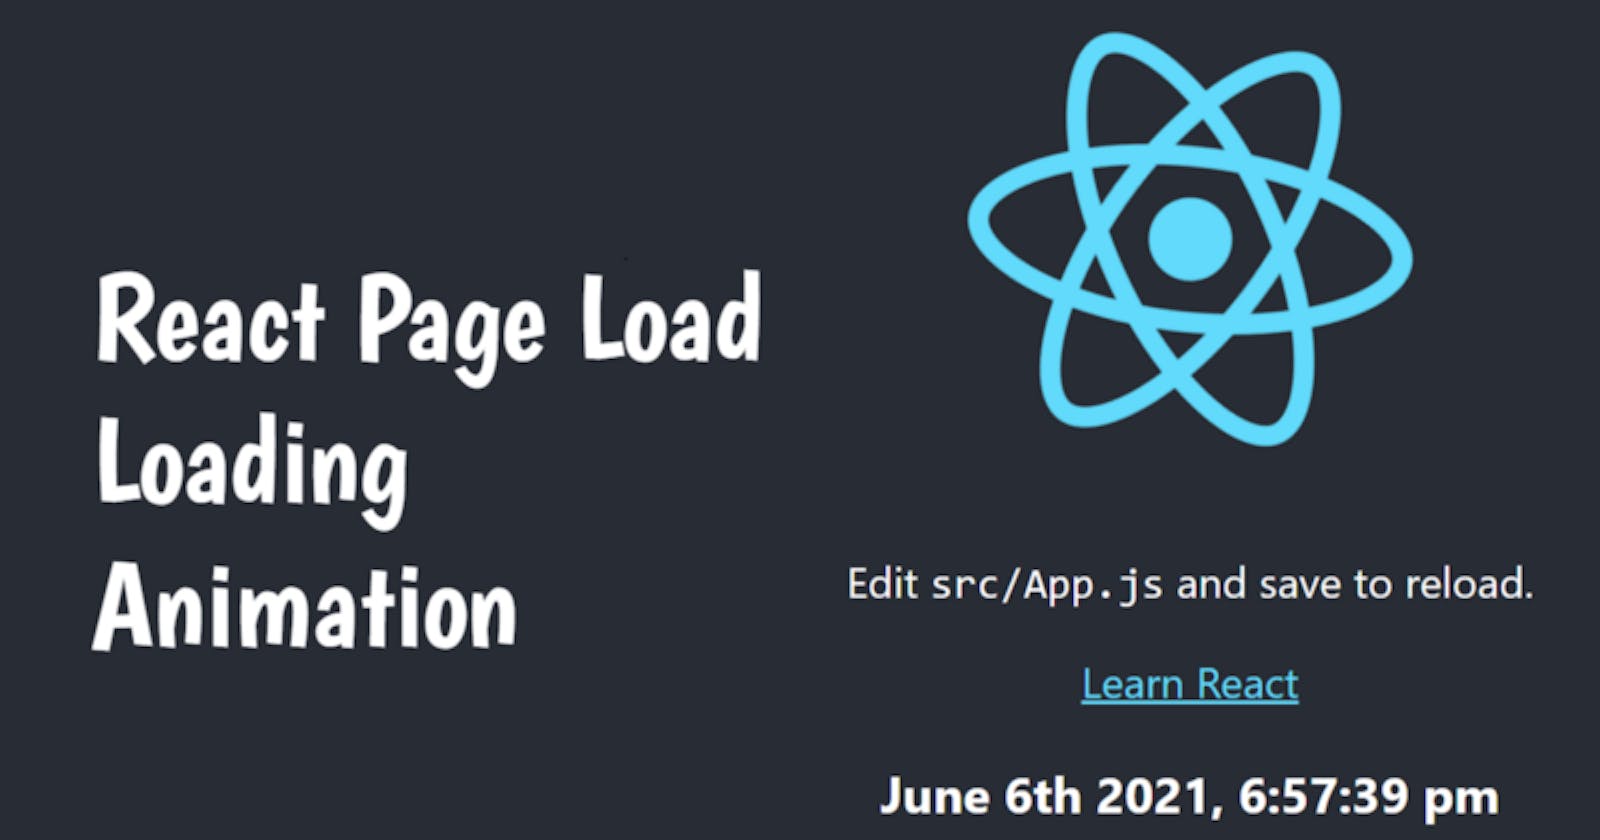 How to Create a Page Load Animated Loader in React